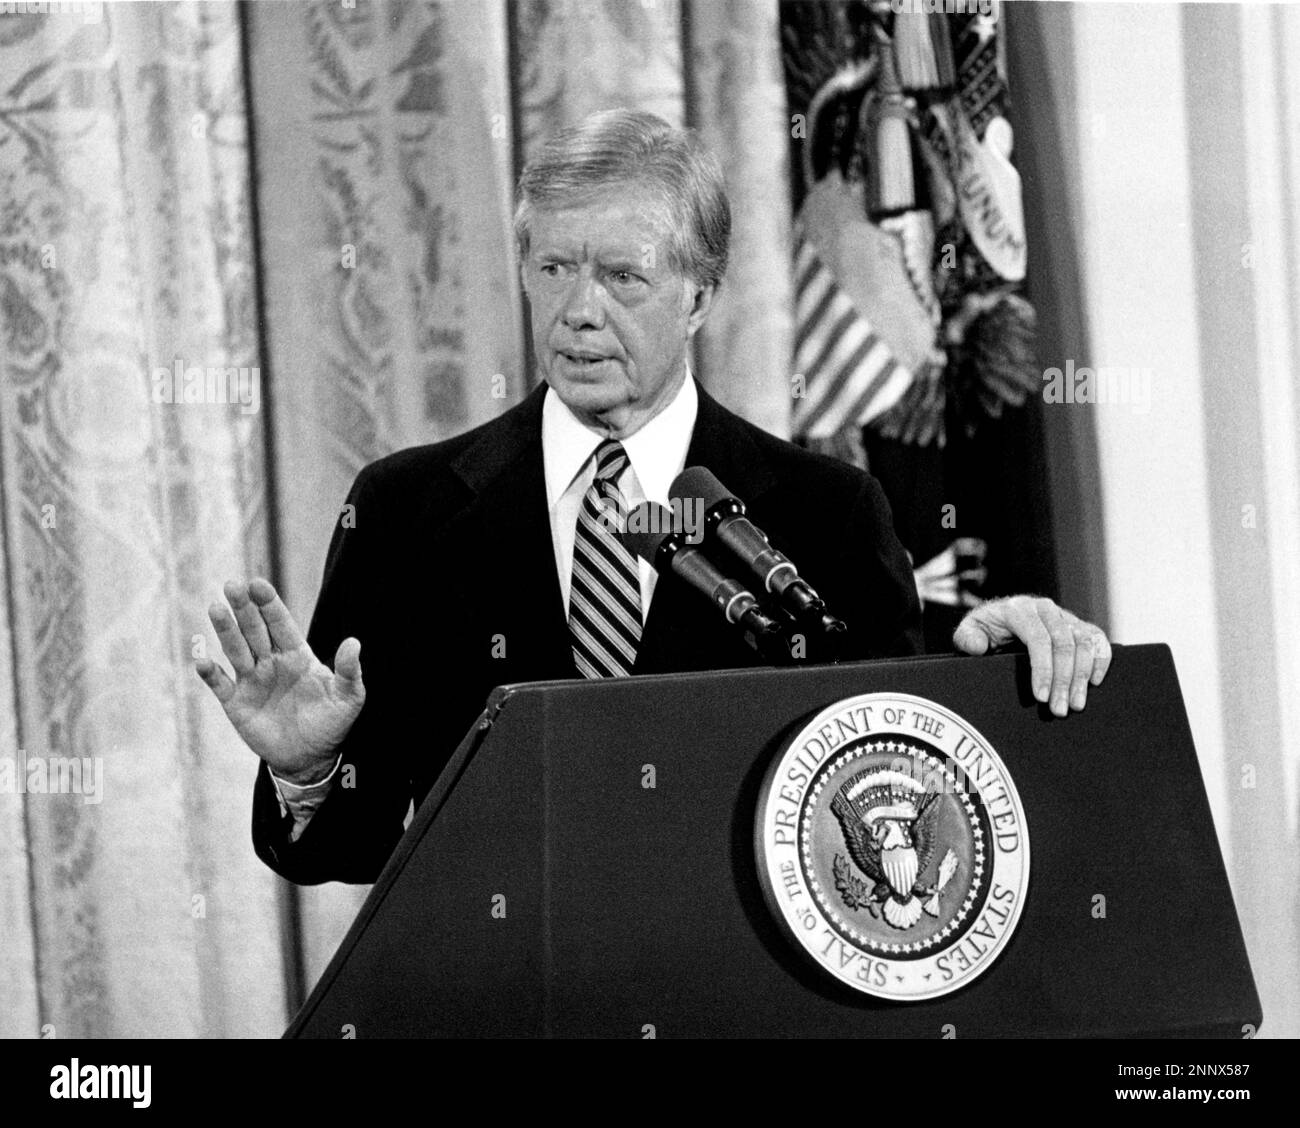 United States President Jimmy Carter holds a press conference in the East Room of the White House in Washington, DC on August 4, 1980.  The President discussed the scandal surrounding his brother Billy.  Carter said there was no impropriety in his brother's activities and insisted neither he nor any member of his administration broke any laws.  The President went on to say his brother tried to free the American hostages being held in Iran through his dealings with the Libyans.Credit: Benjamin E. 'Gene' Forte / CNP / MediaPunch Stock Photo